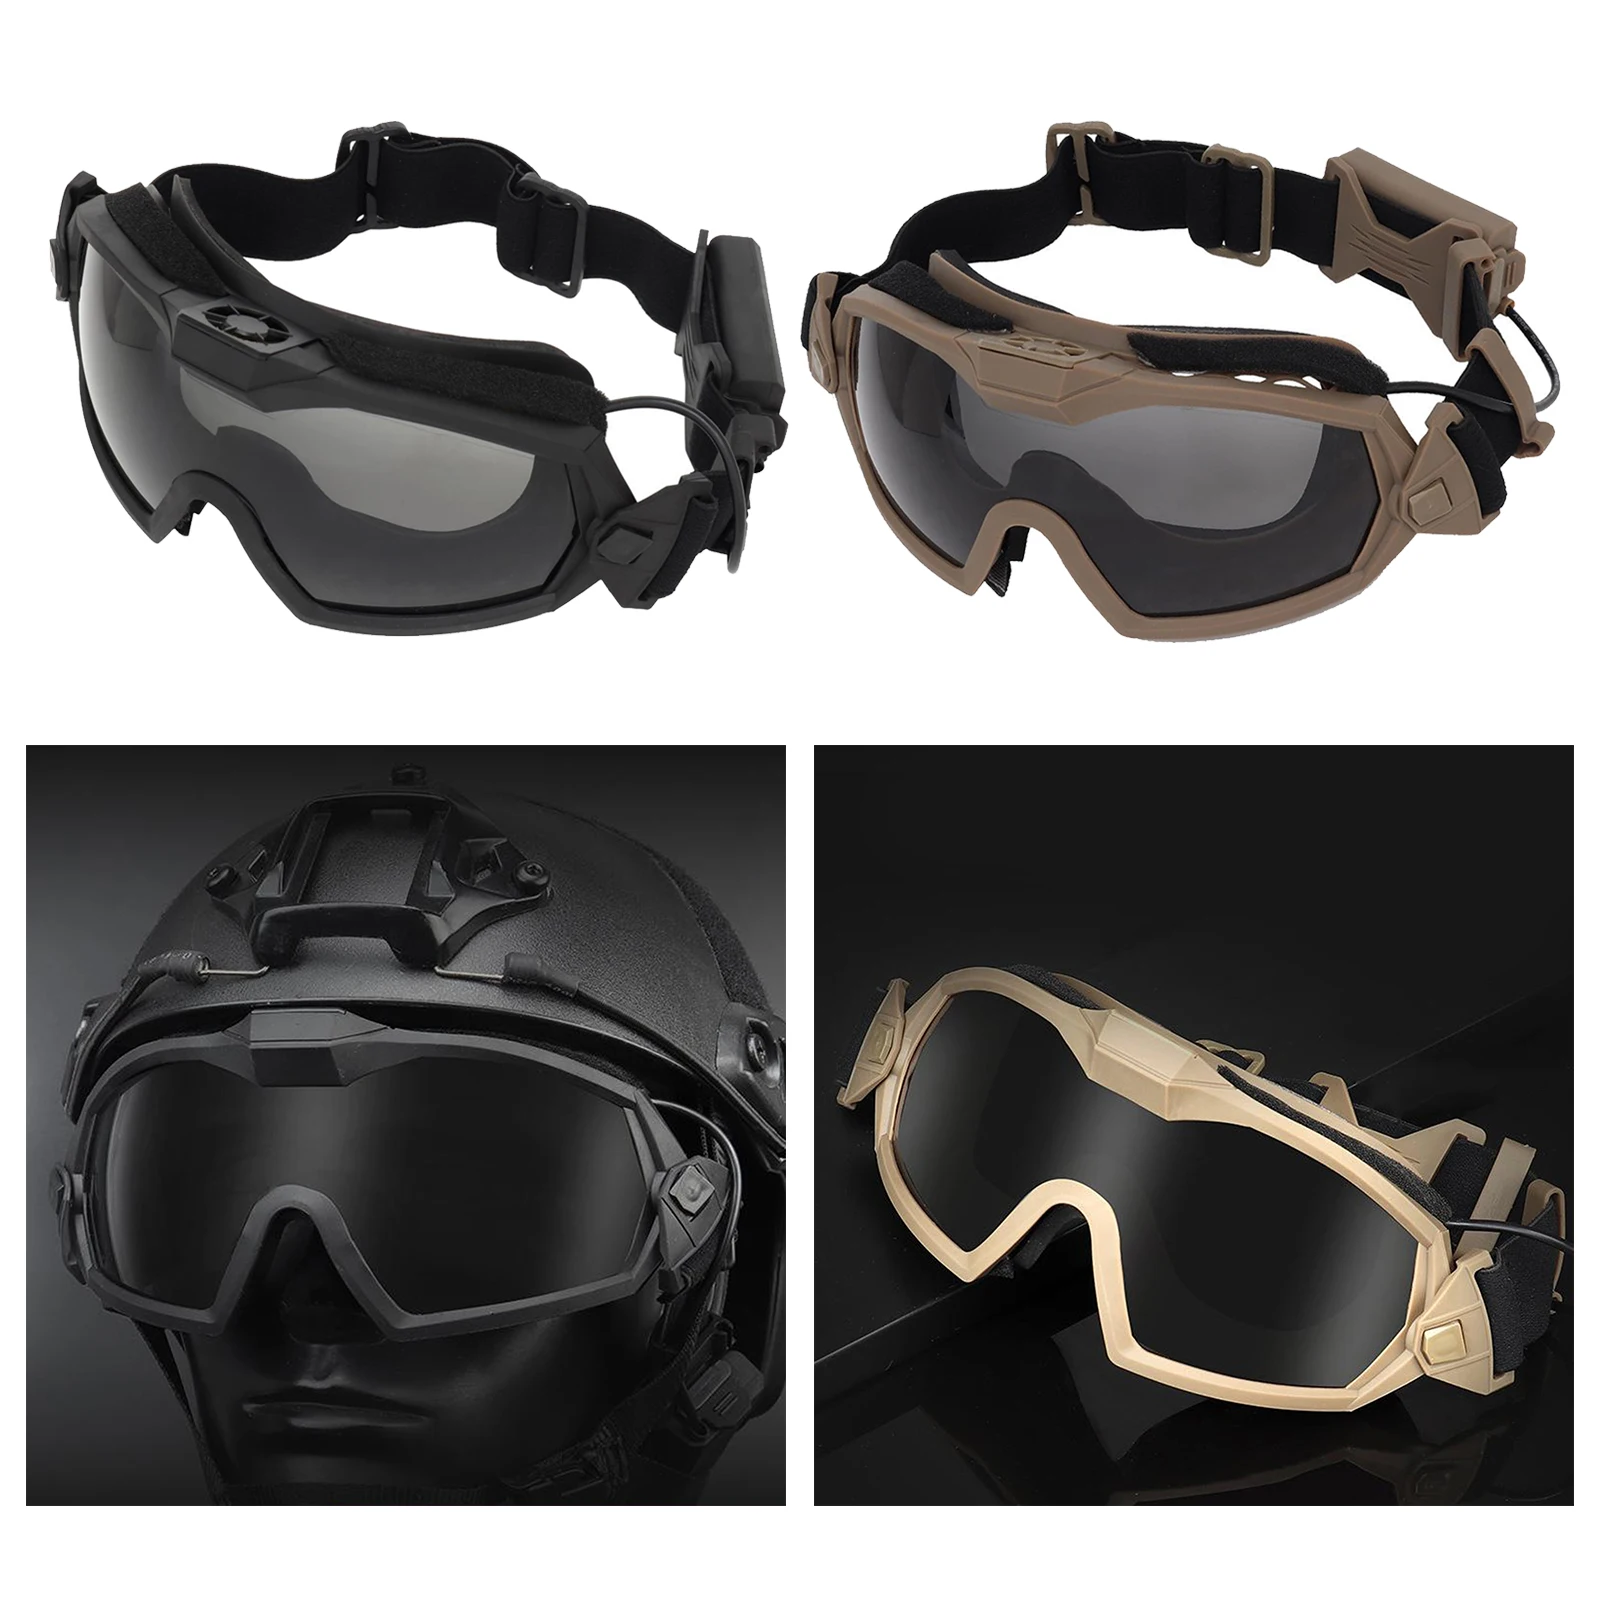 Tactical / Motorcycle Windproof Wargame Goggles Shooting Glasses 2 Lens Anti-Fog